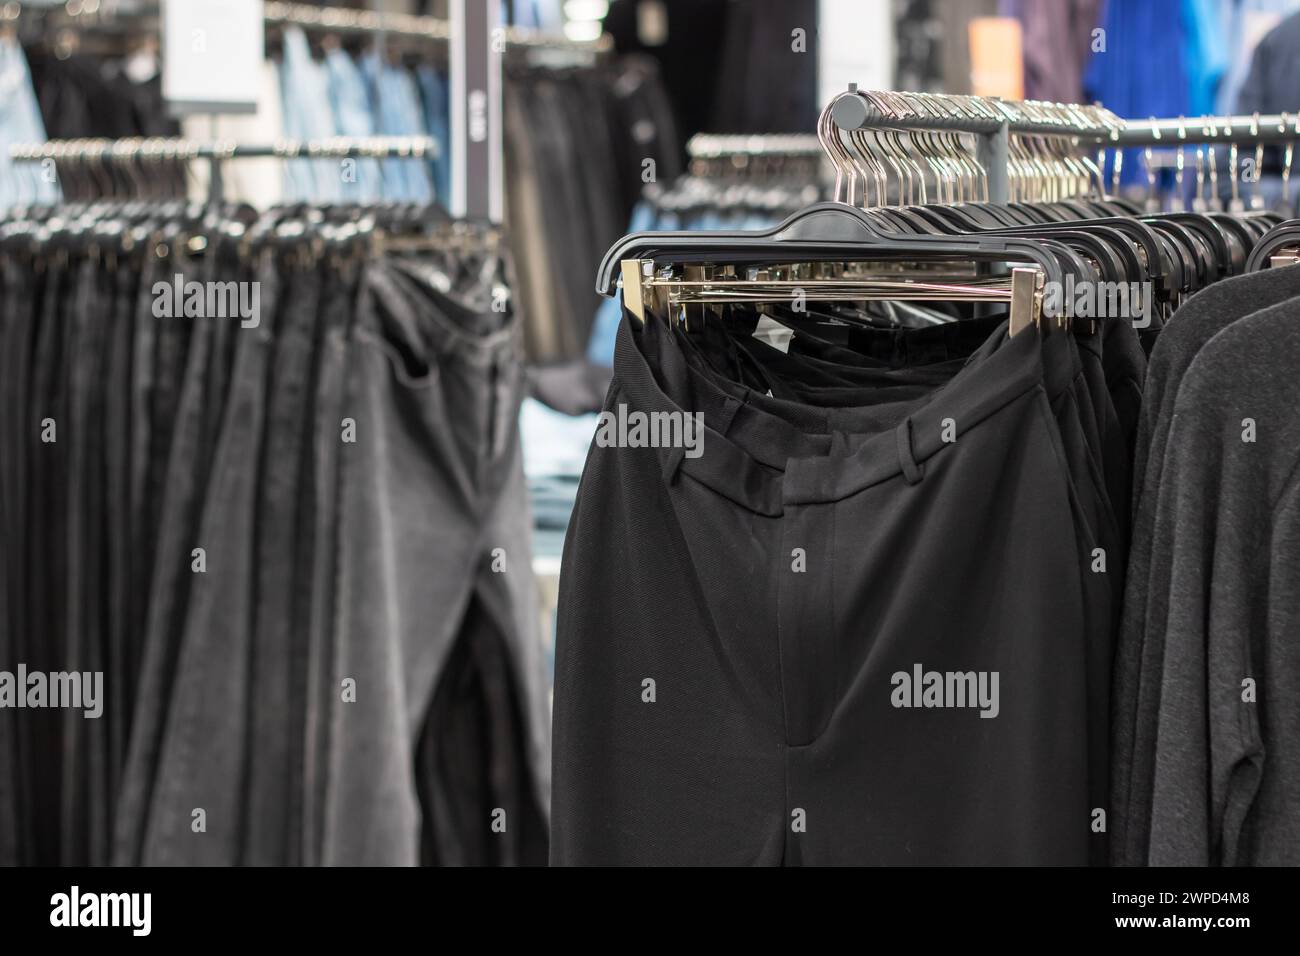 Pants hanging on hangers in a store close up Stock Photo